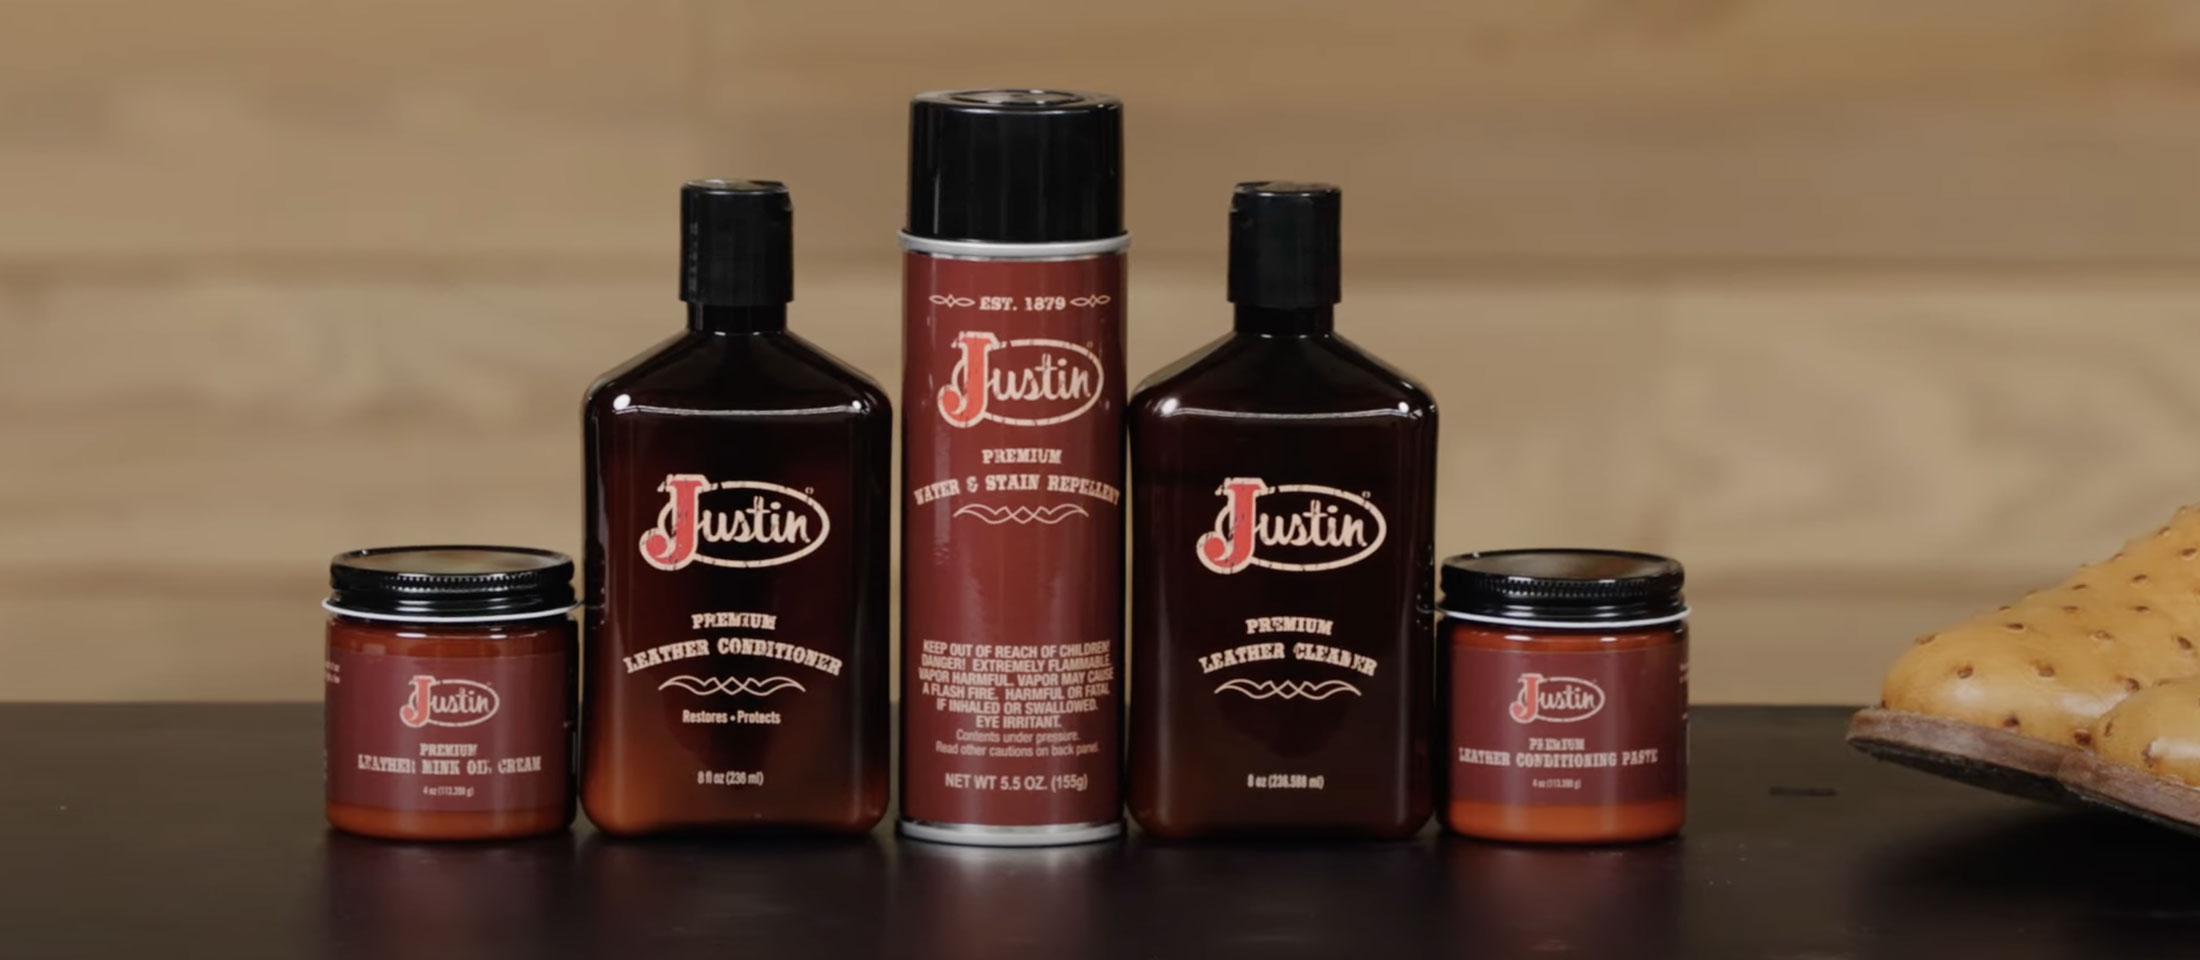 Shoe care products including leather conditioner, water and stain repellent spray, leather cleaner, and leather: mink and oil cream placed on a table.